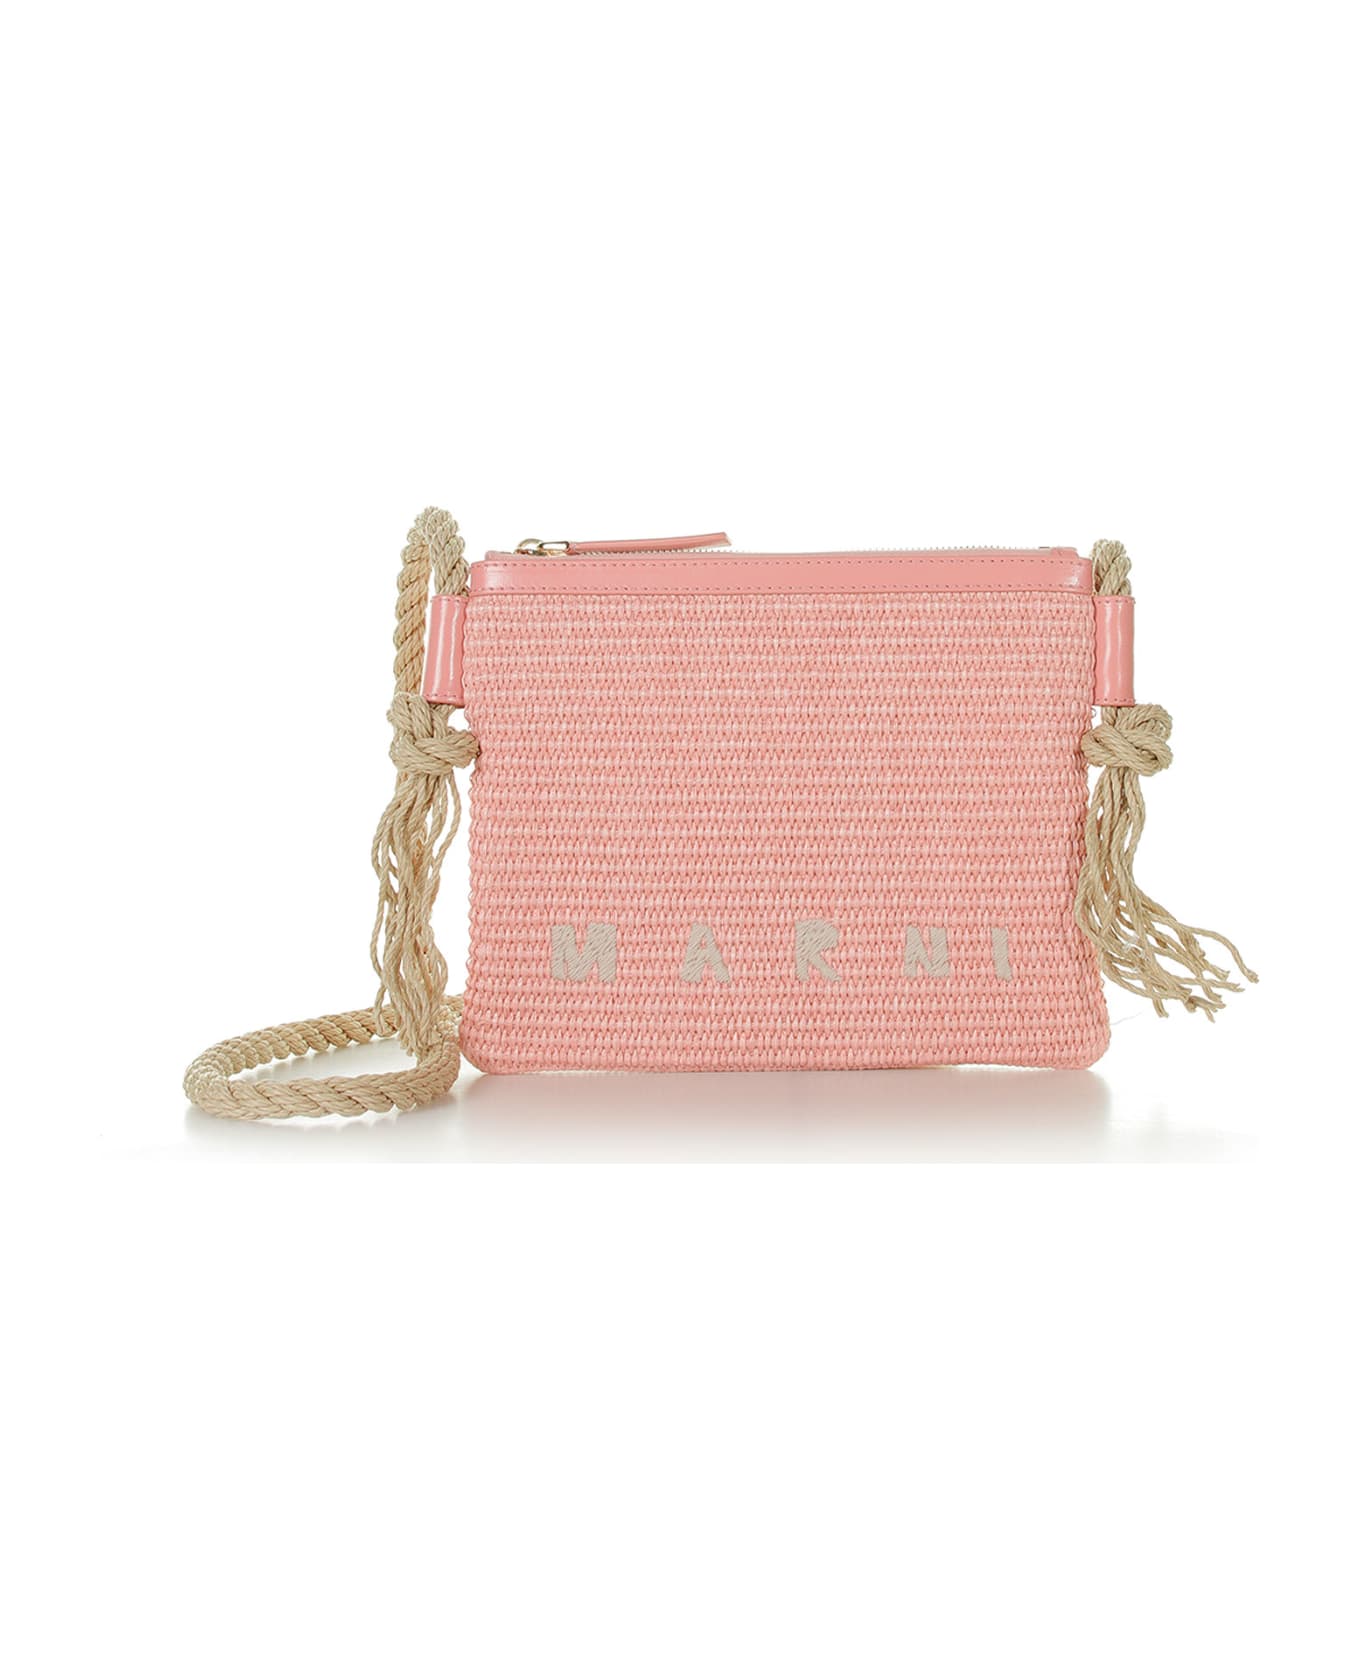 Marni Shoulder Bag In Raffia Fabric With Leather Profiles - LIGHT PINK/LIGHT PINK